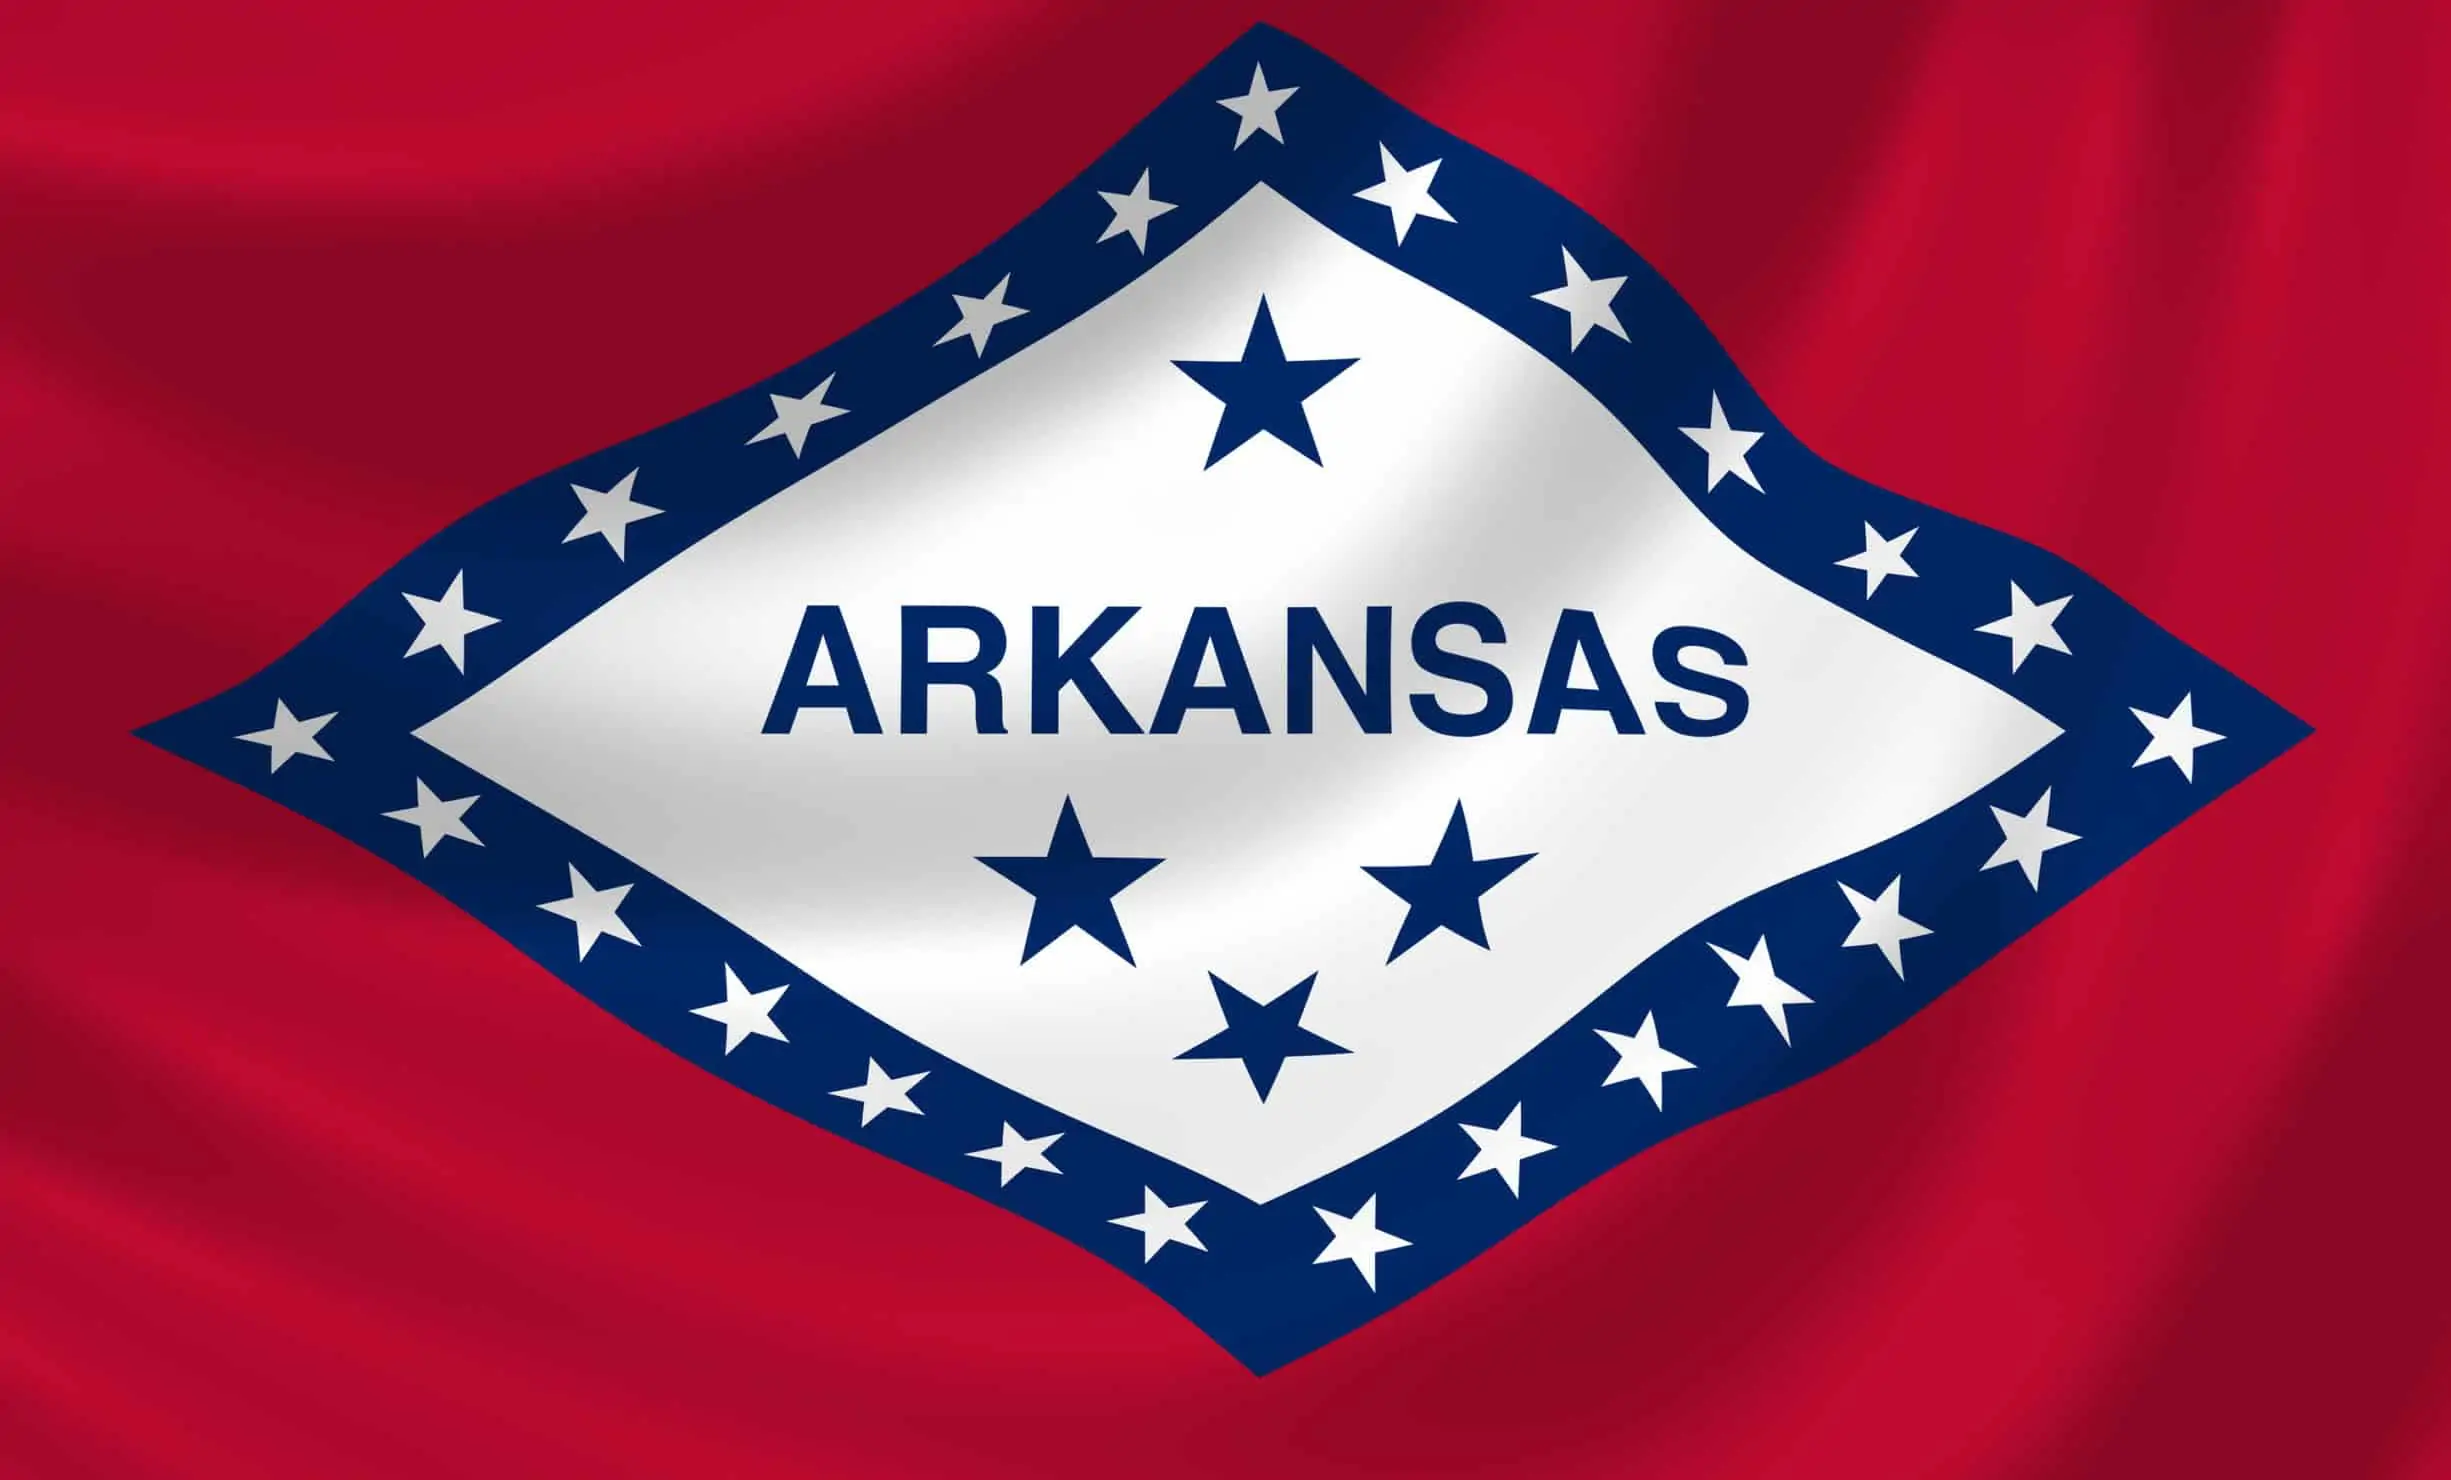 How to Apply for a Medical Cannabis Card in Arkansas